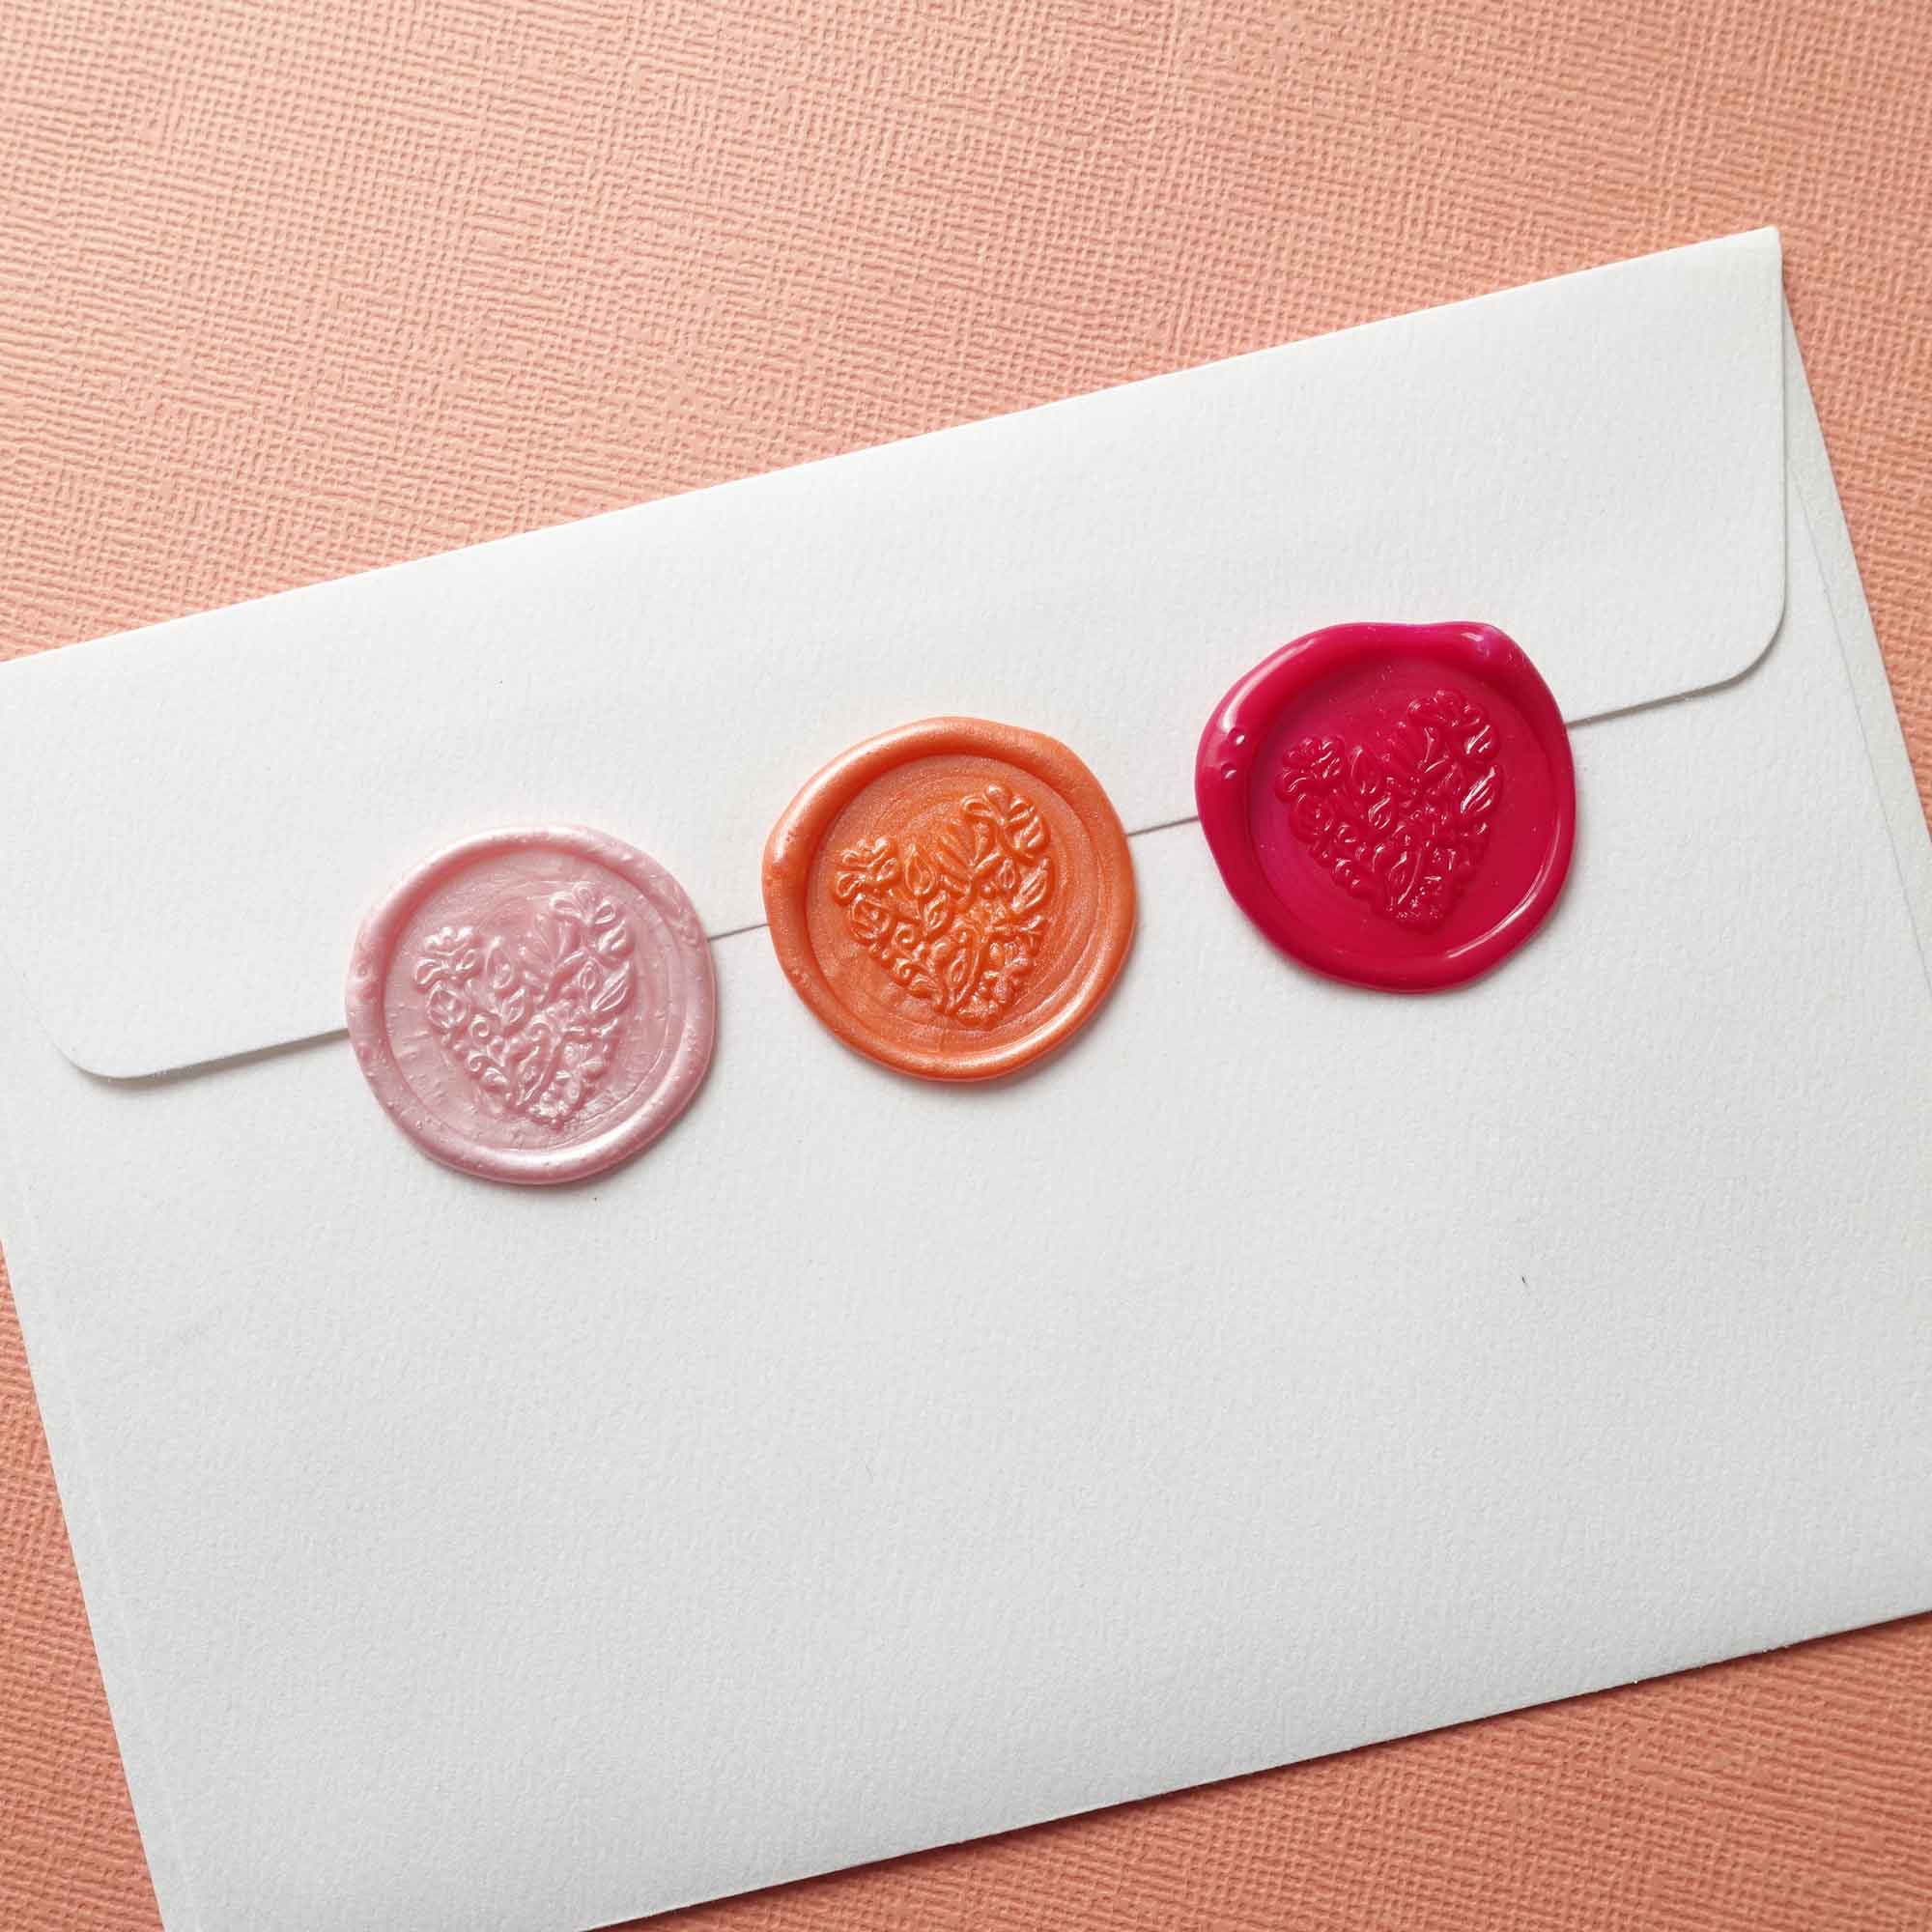 Love Letter Wax Seal Stamp Kit, Latter Seal Stamp With Flower, Envelope Wax  Seal, Wedding Seal,party Wax Seal Stamp Set, Wax Seal Stamp Gift 